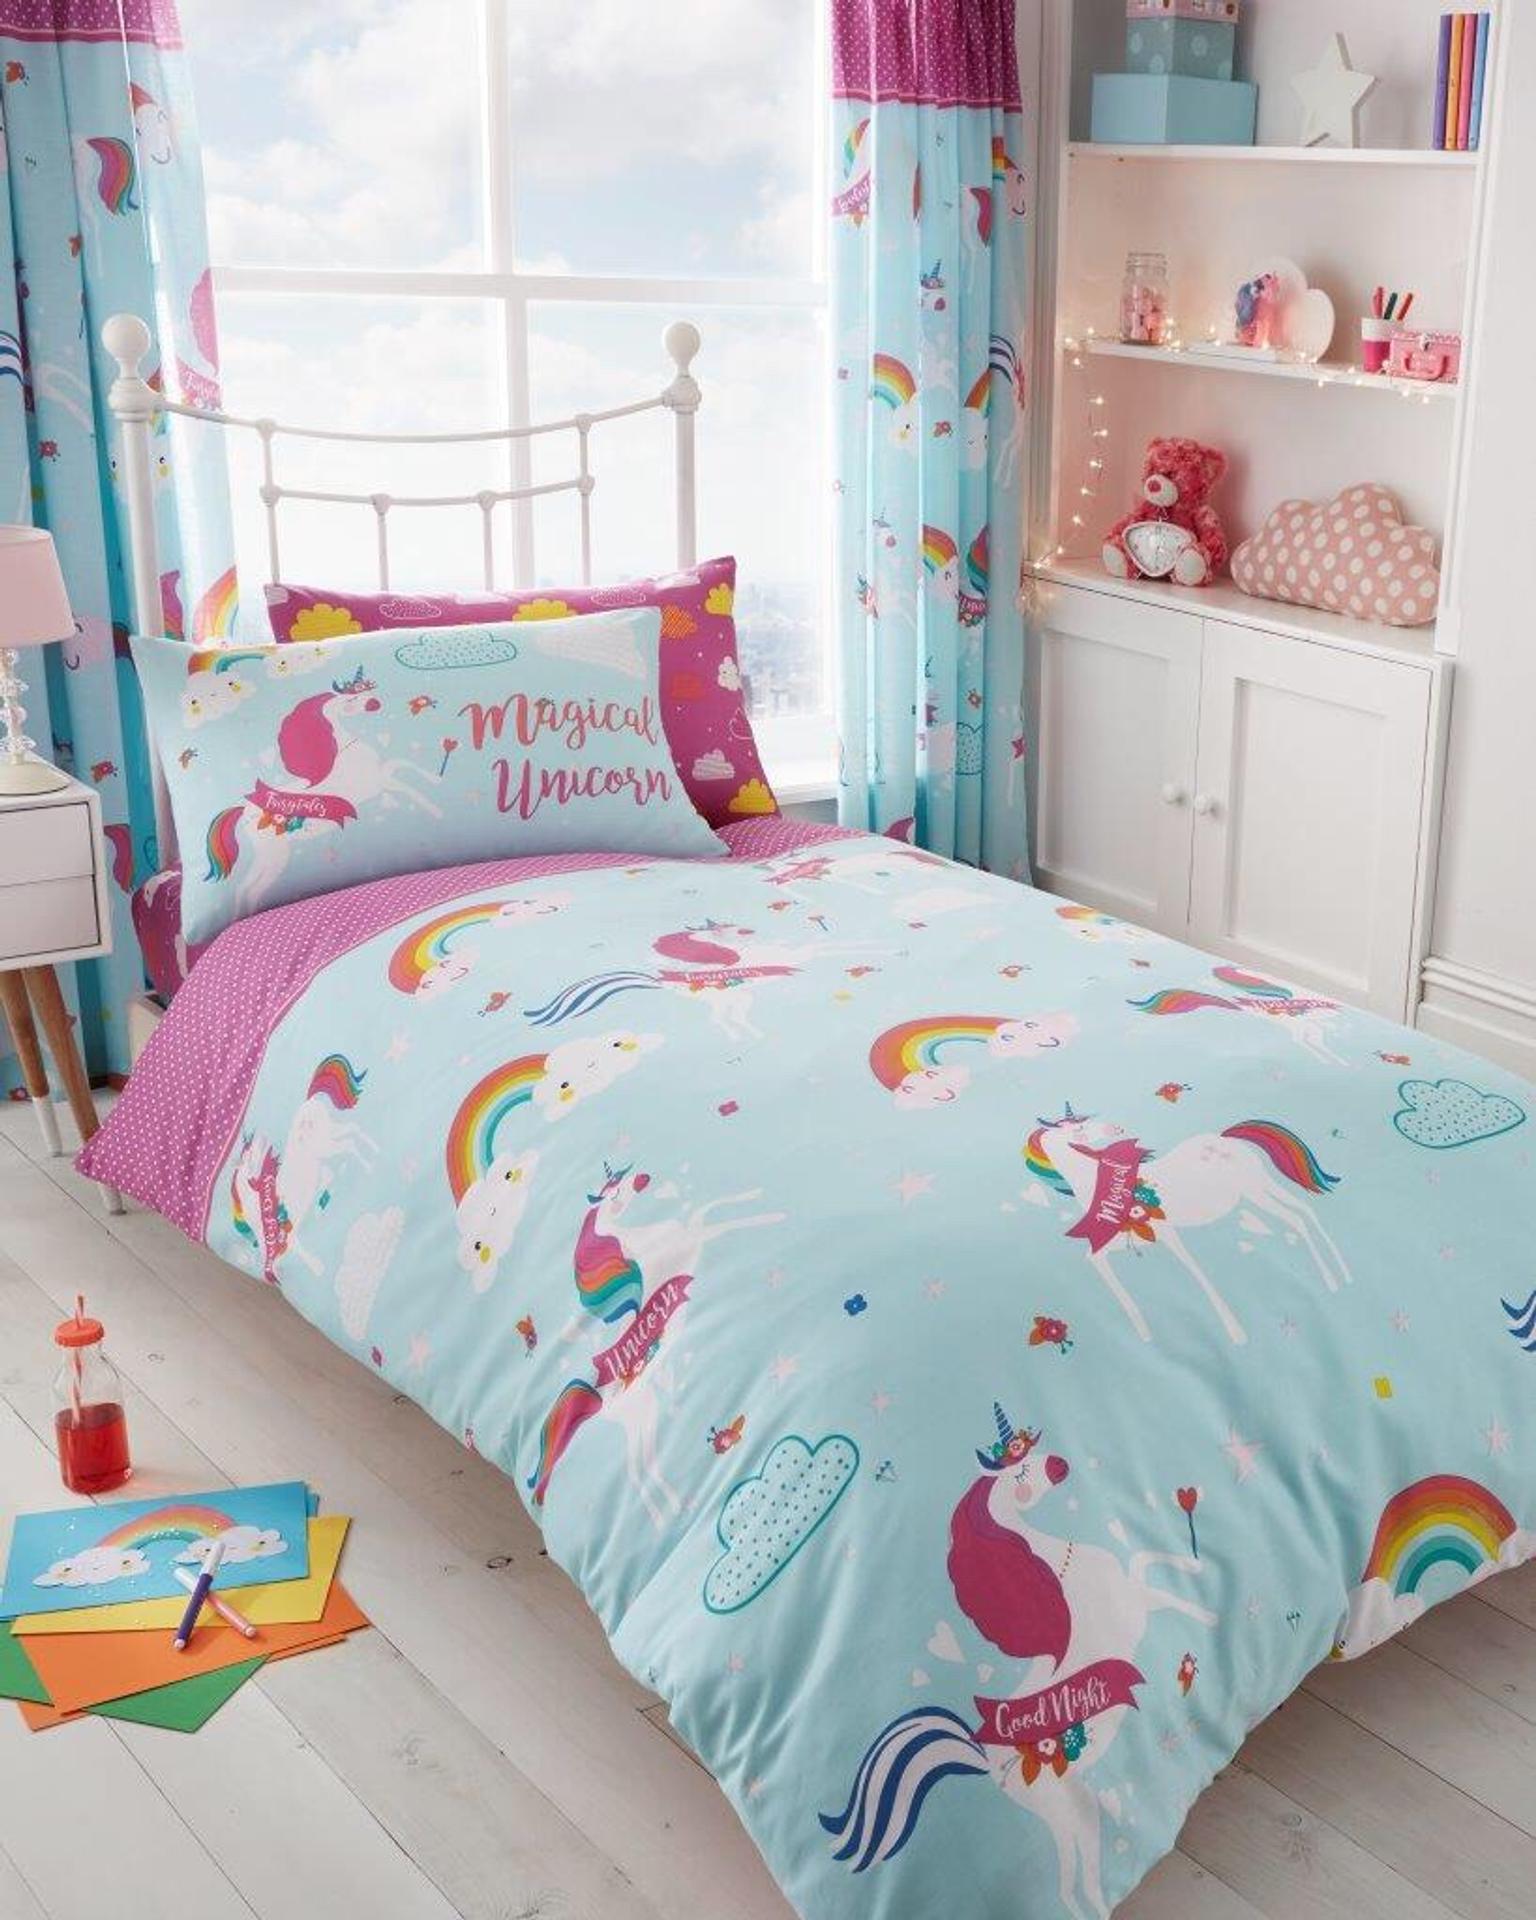 Unicorn Bedding And Matching Curtains In Manchester For 30 00 For